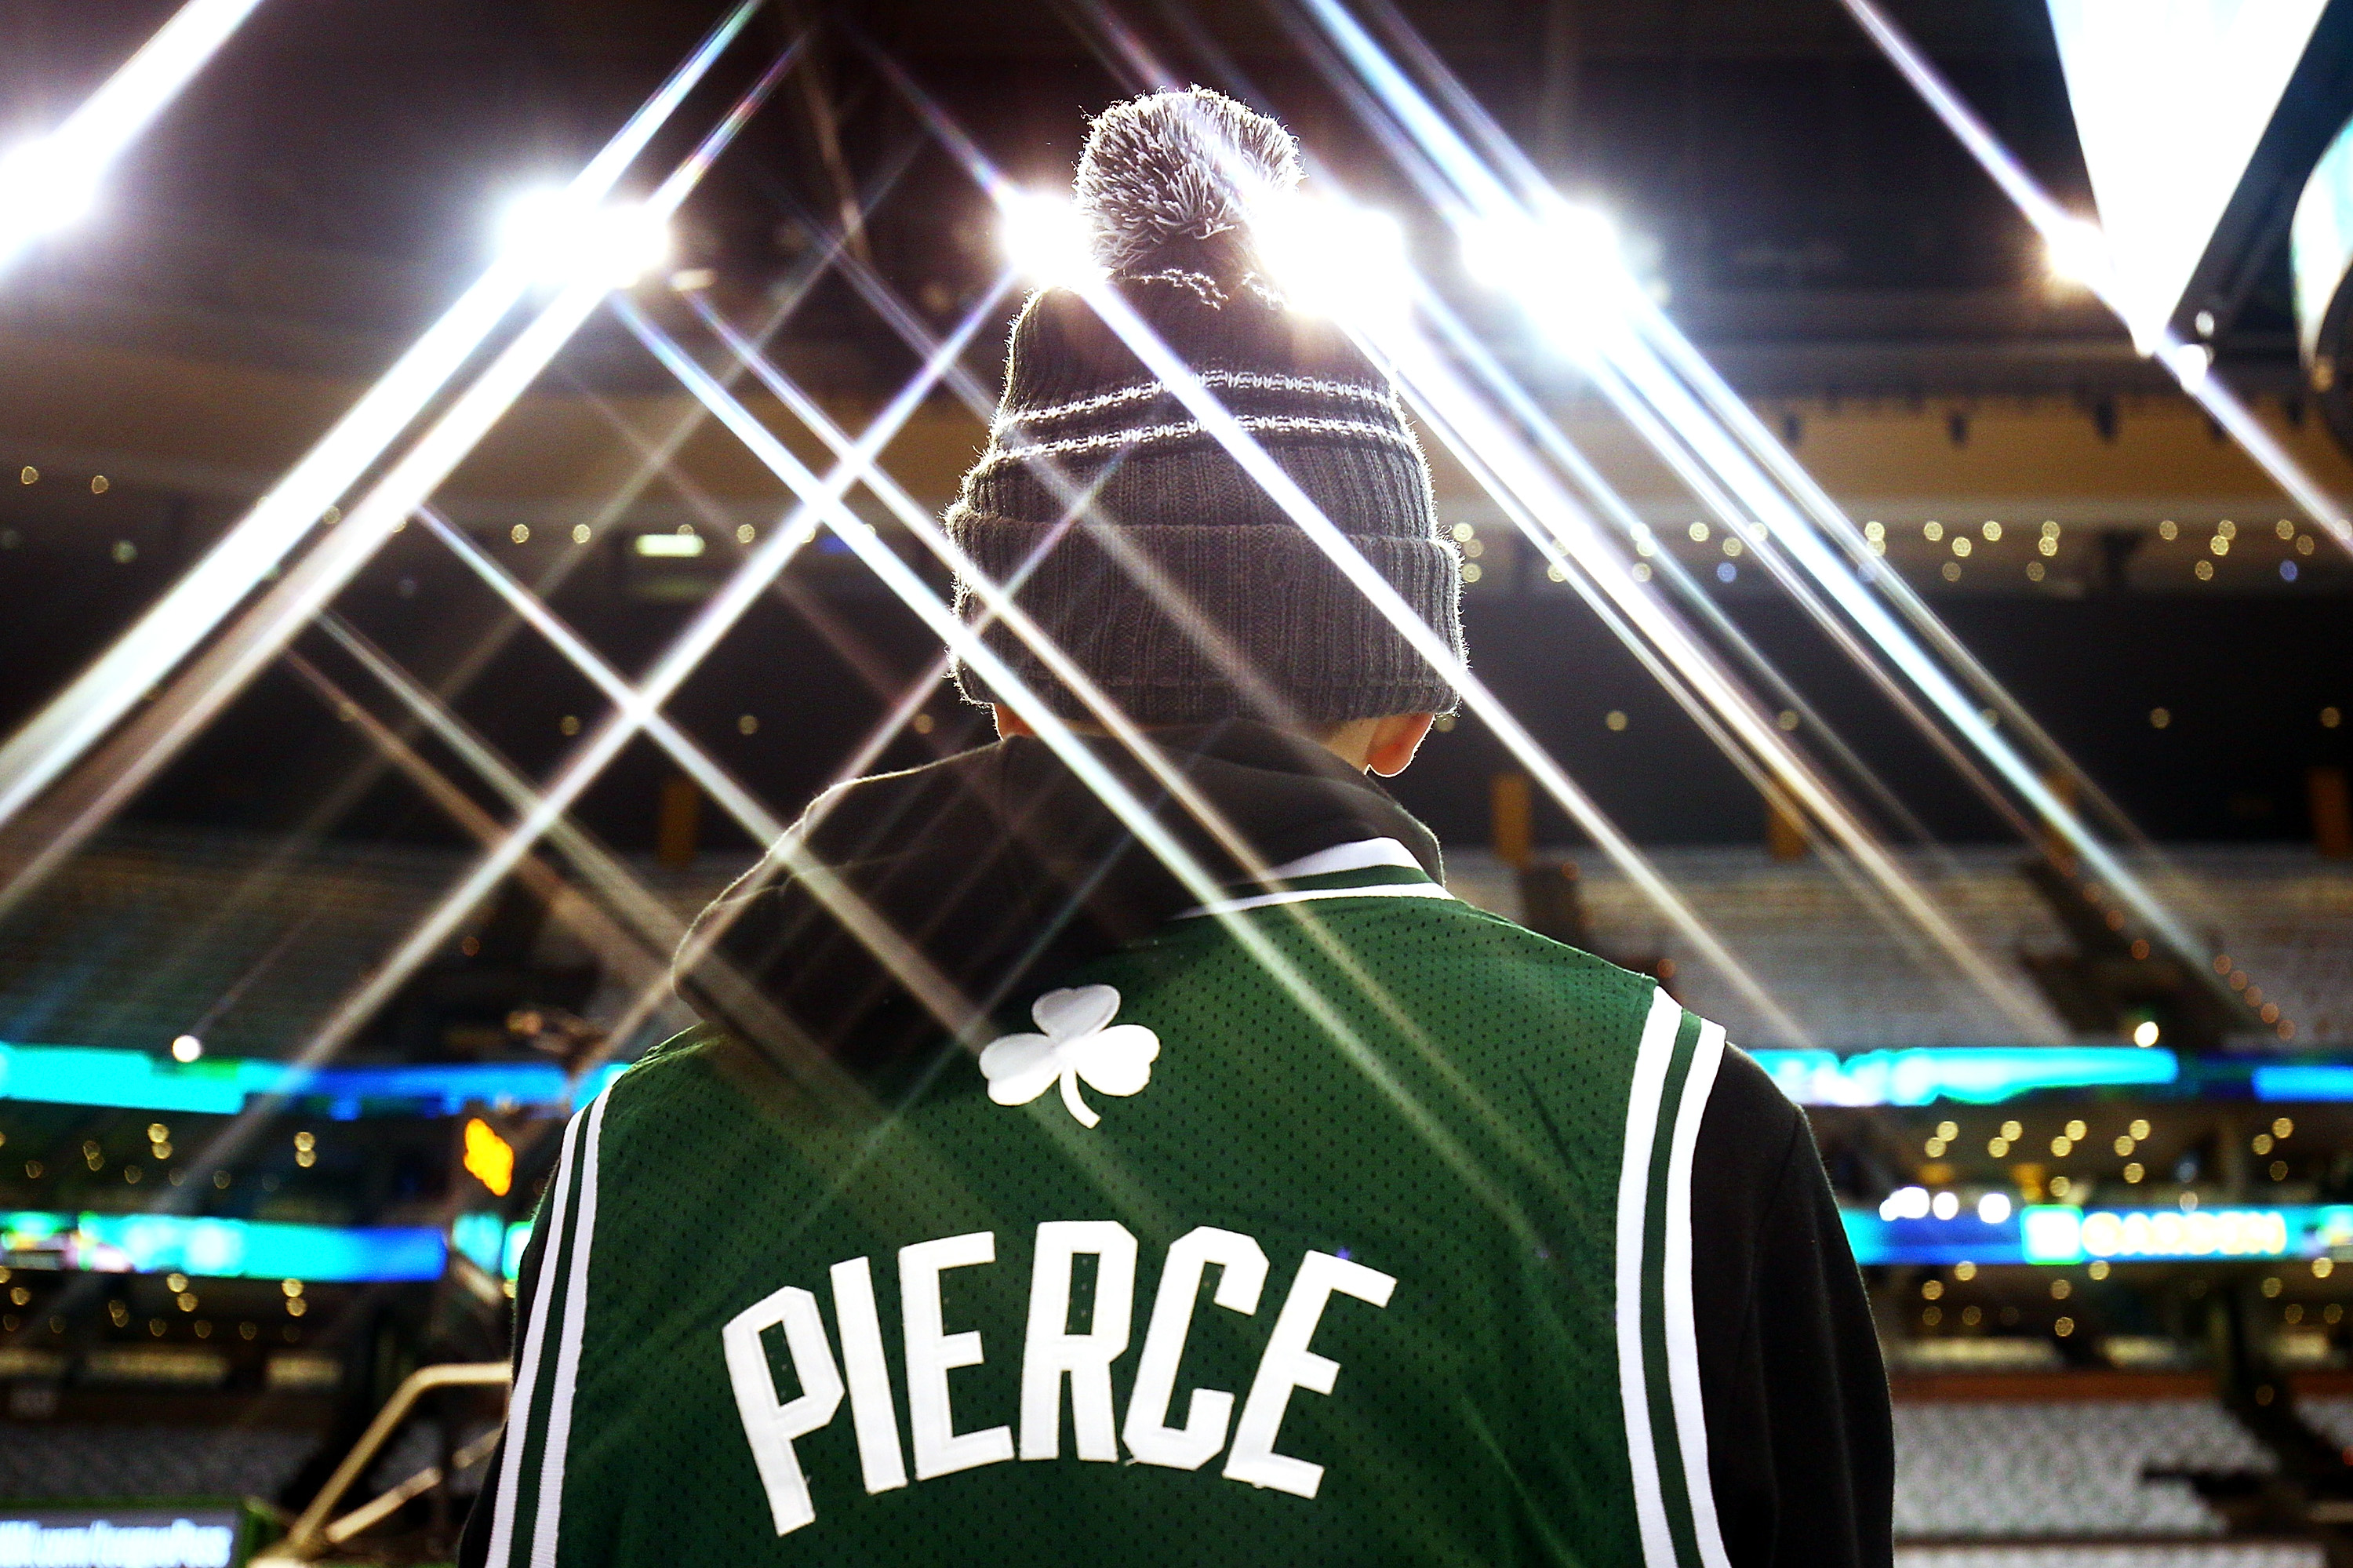 Paul Pierce remembers glory days with Celtics as No. 34 is raised